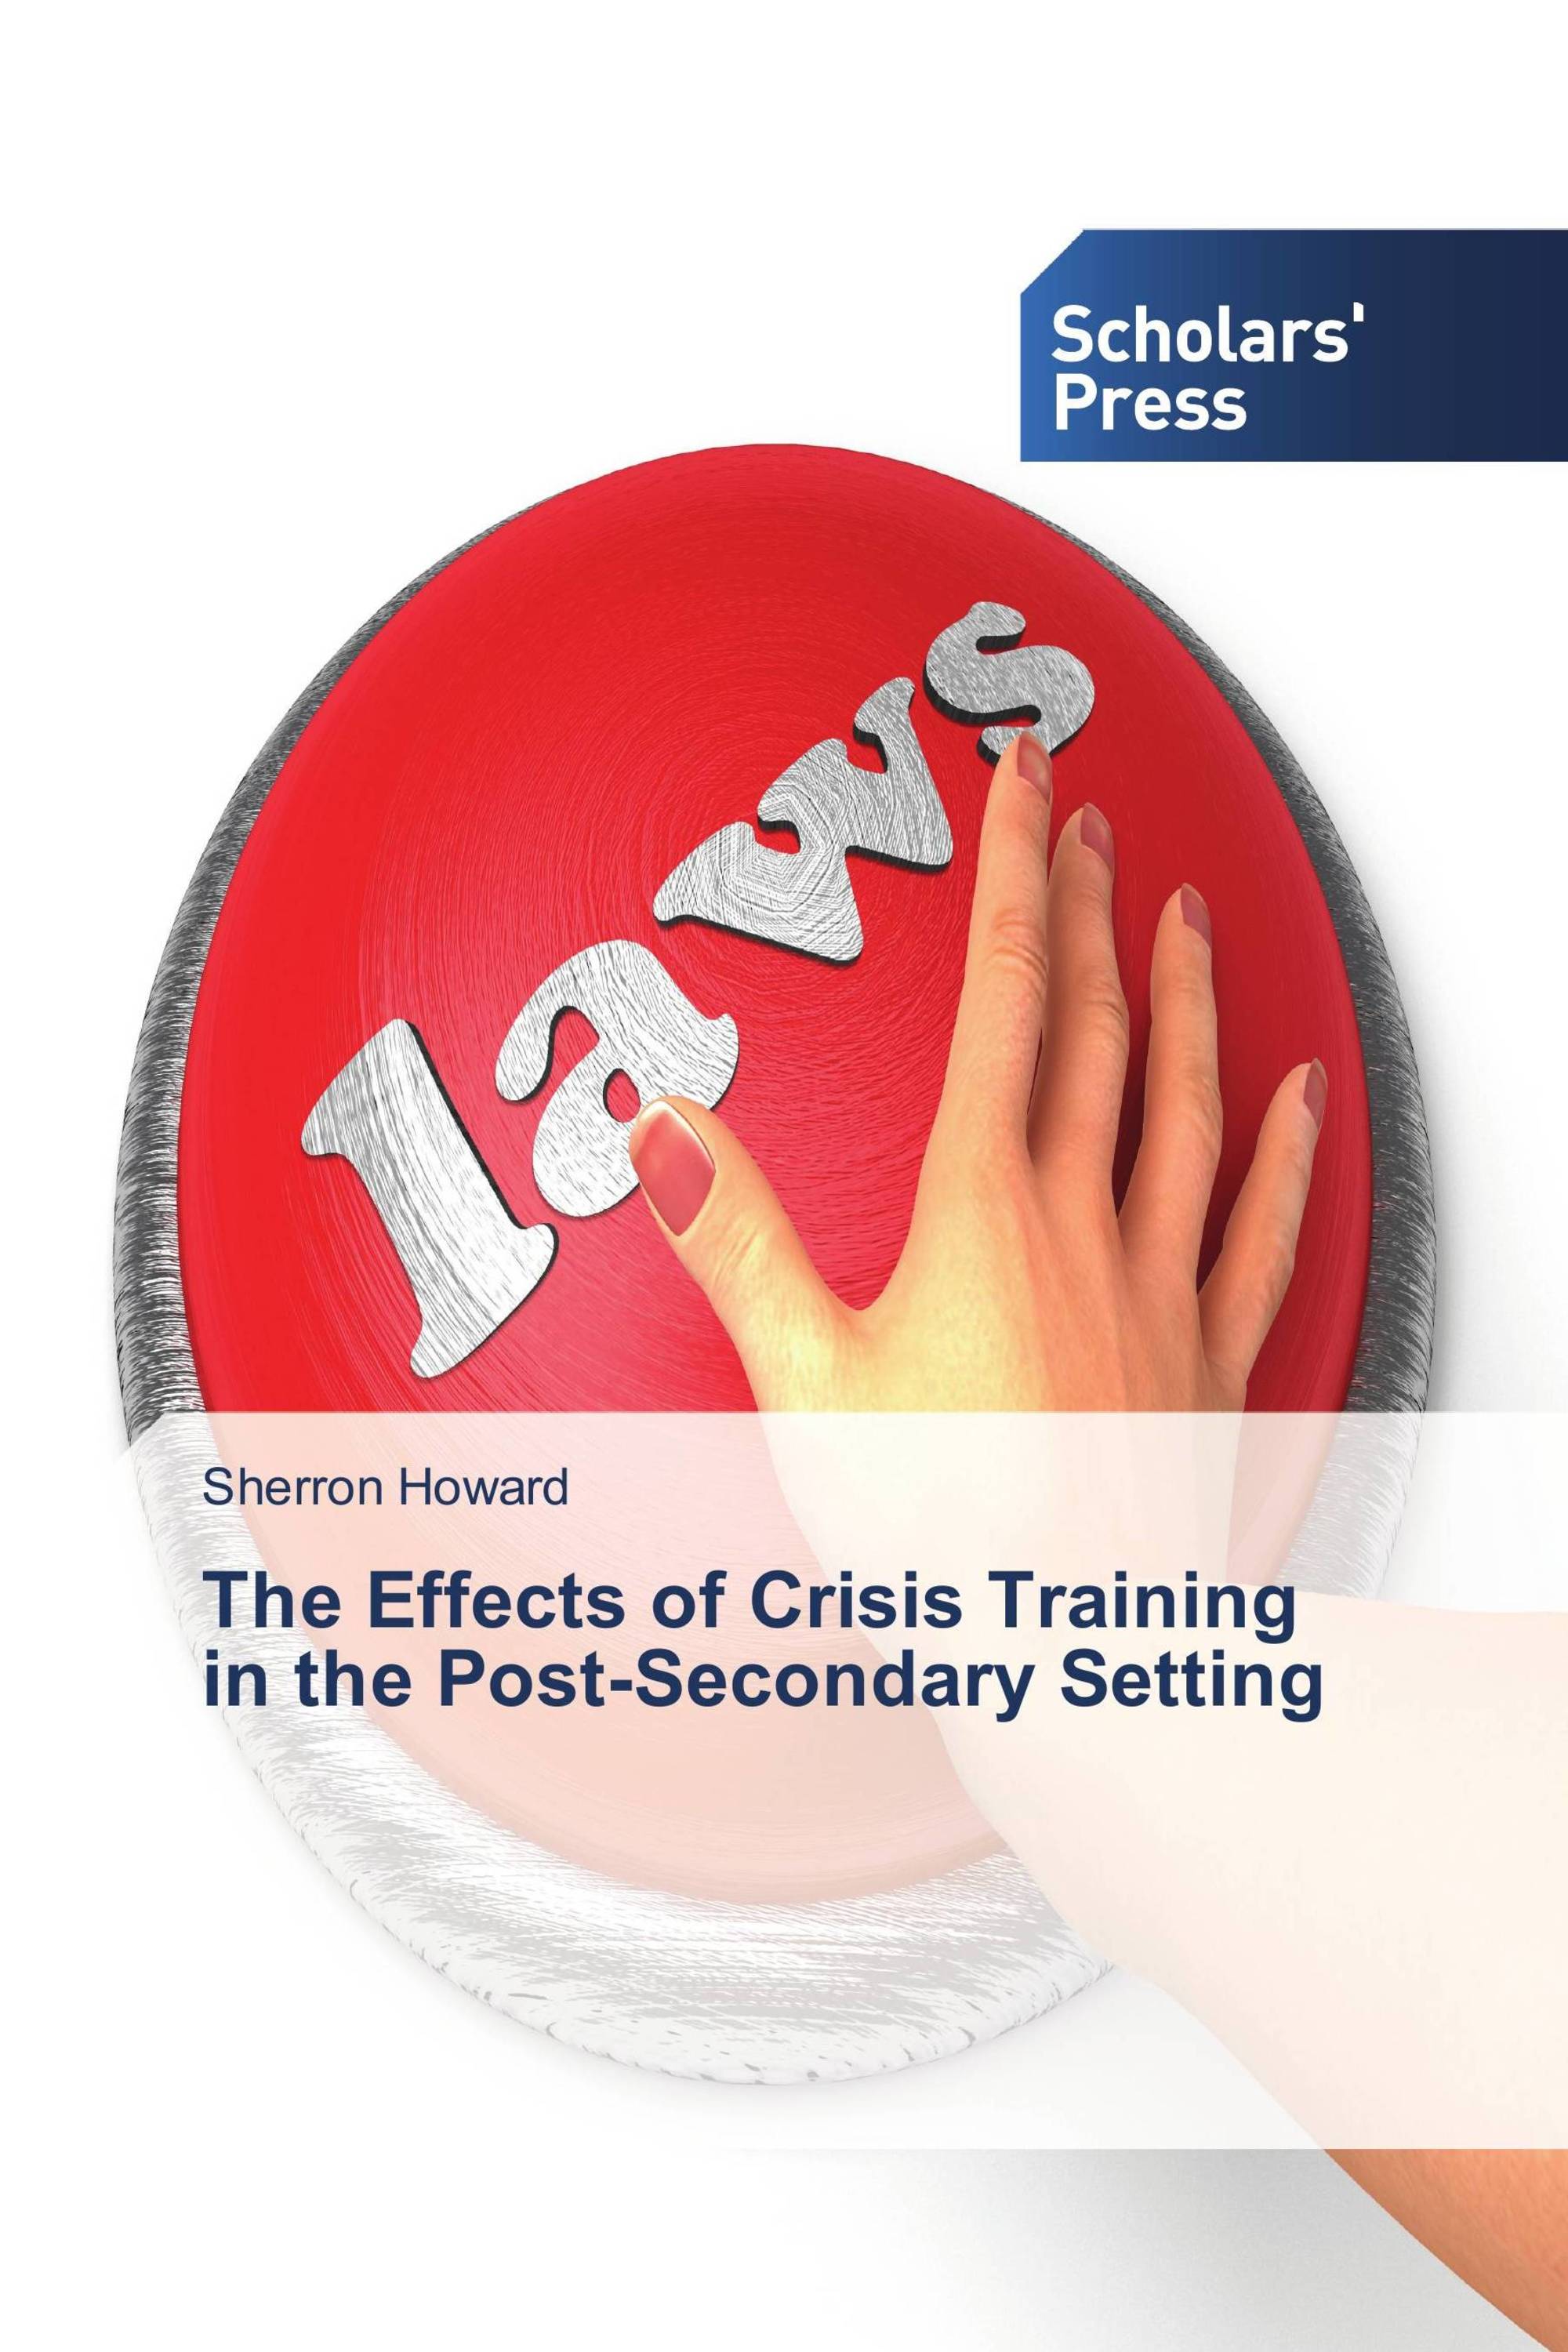 The Effects of Crisis Training in the Post-Secondary Setting